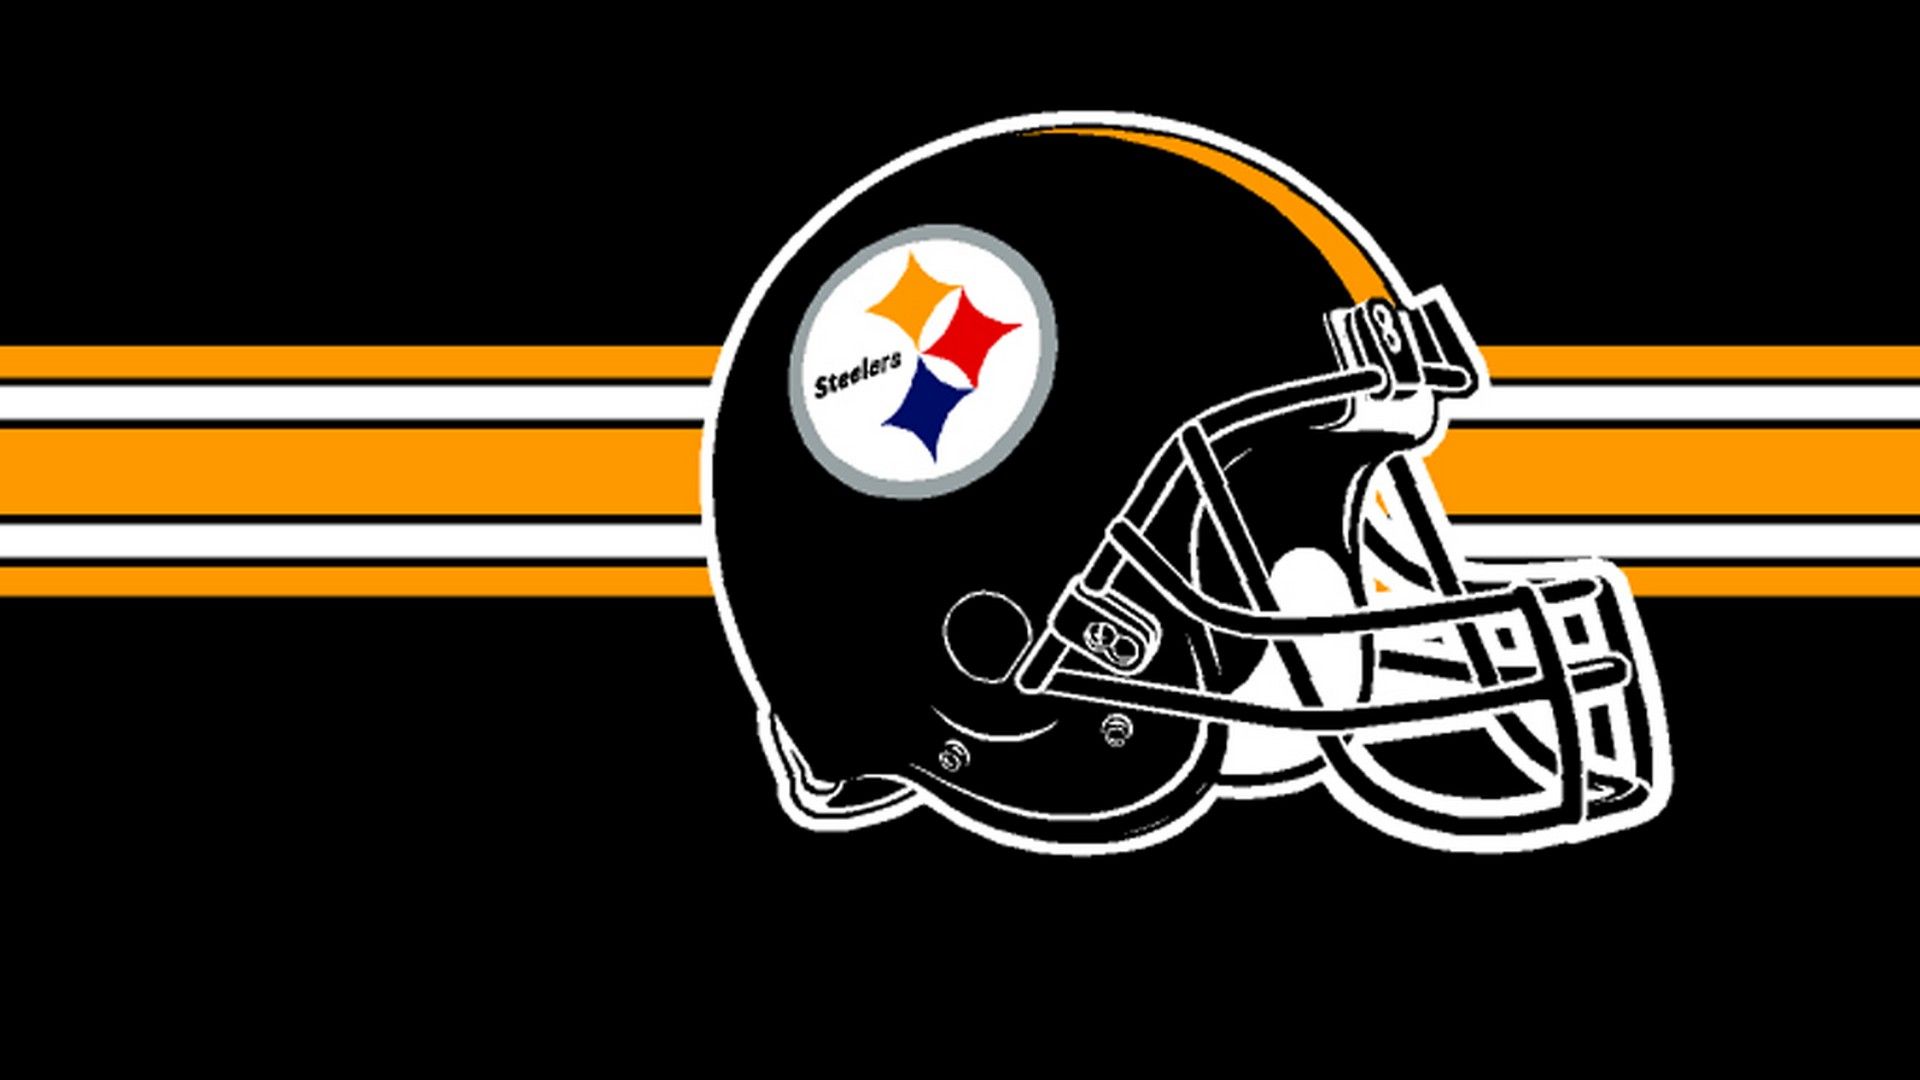 Steelers football wallpaper for mac backgrounds